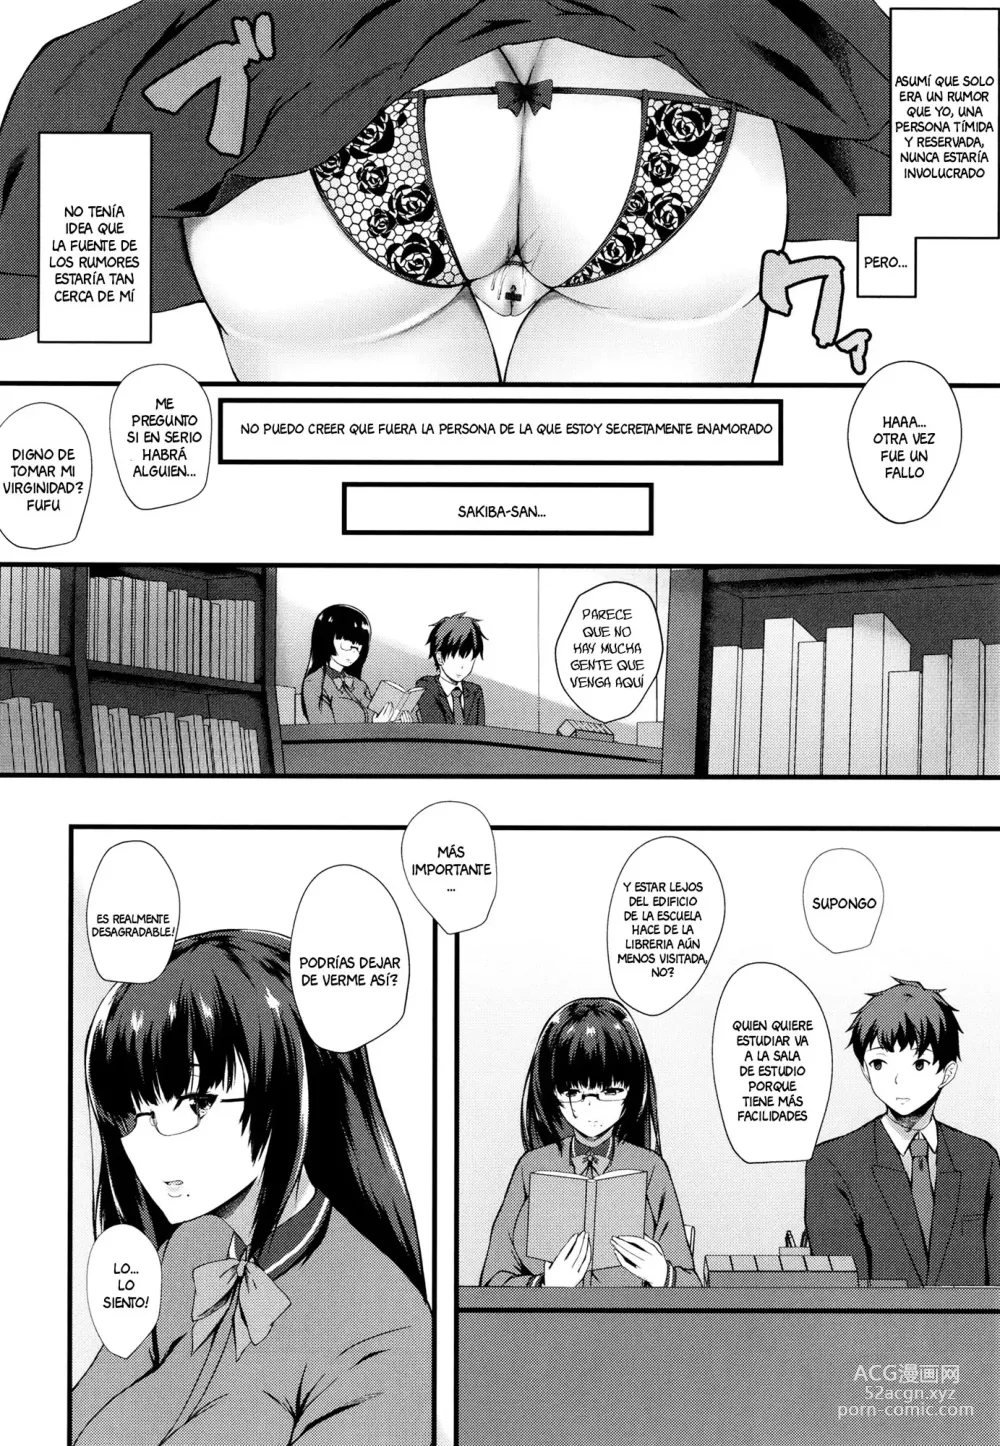 Page 3 of manga A Student with Mental Retardation